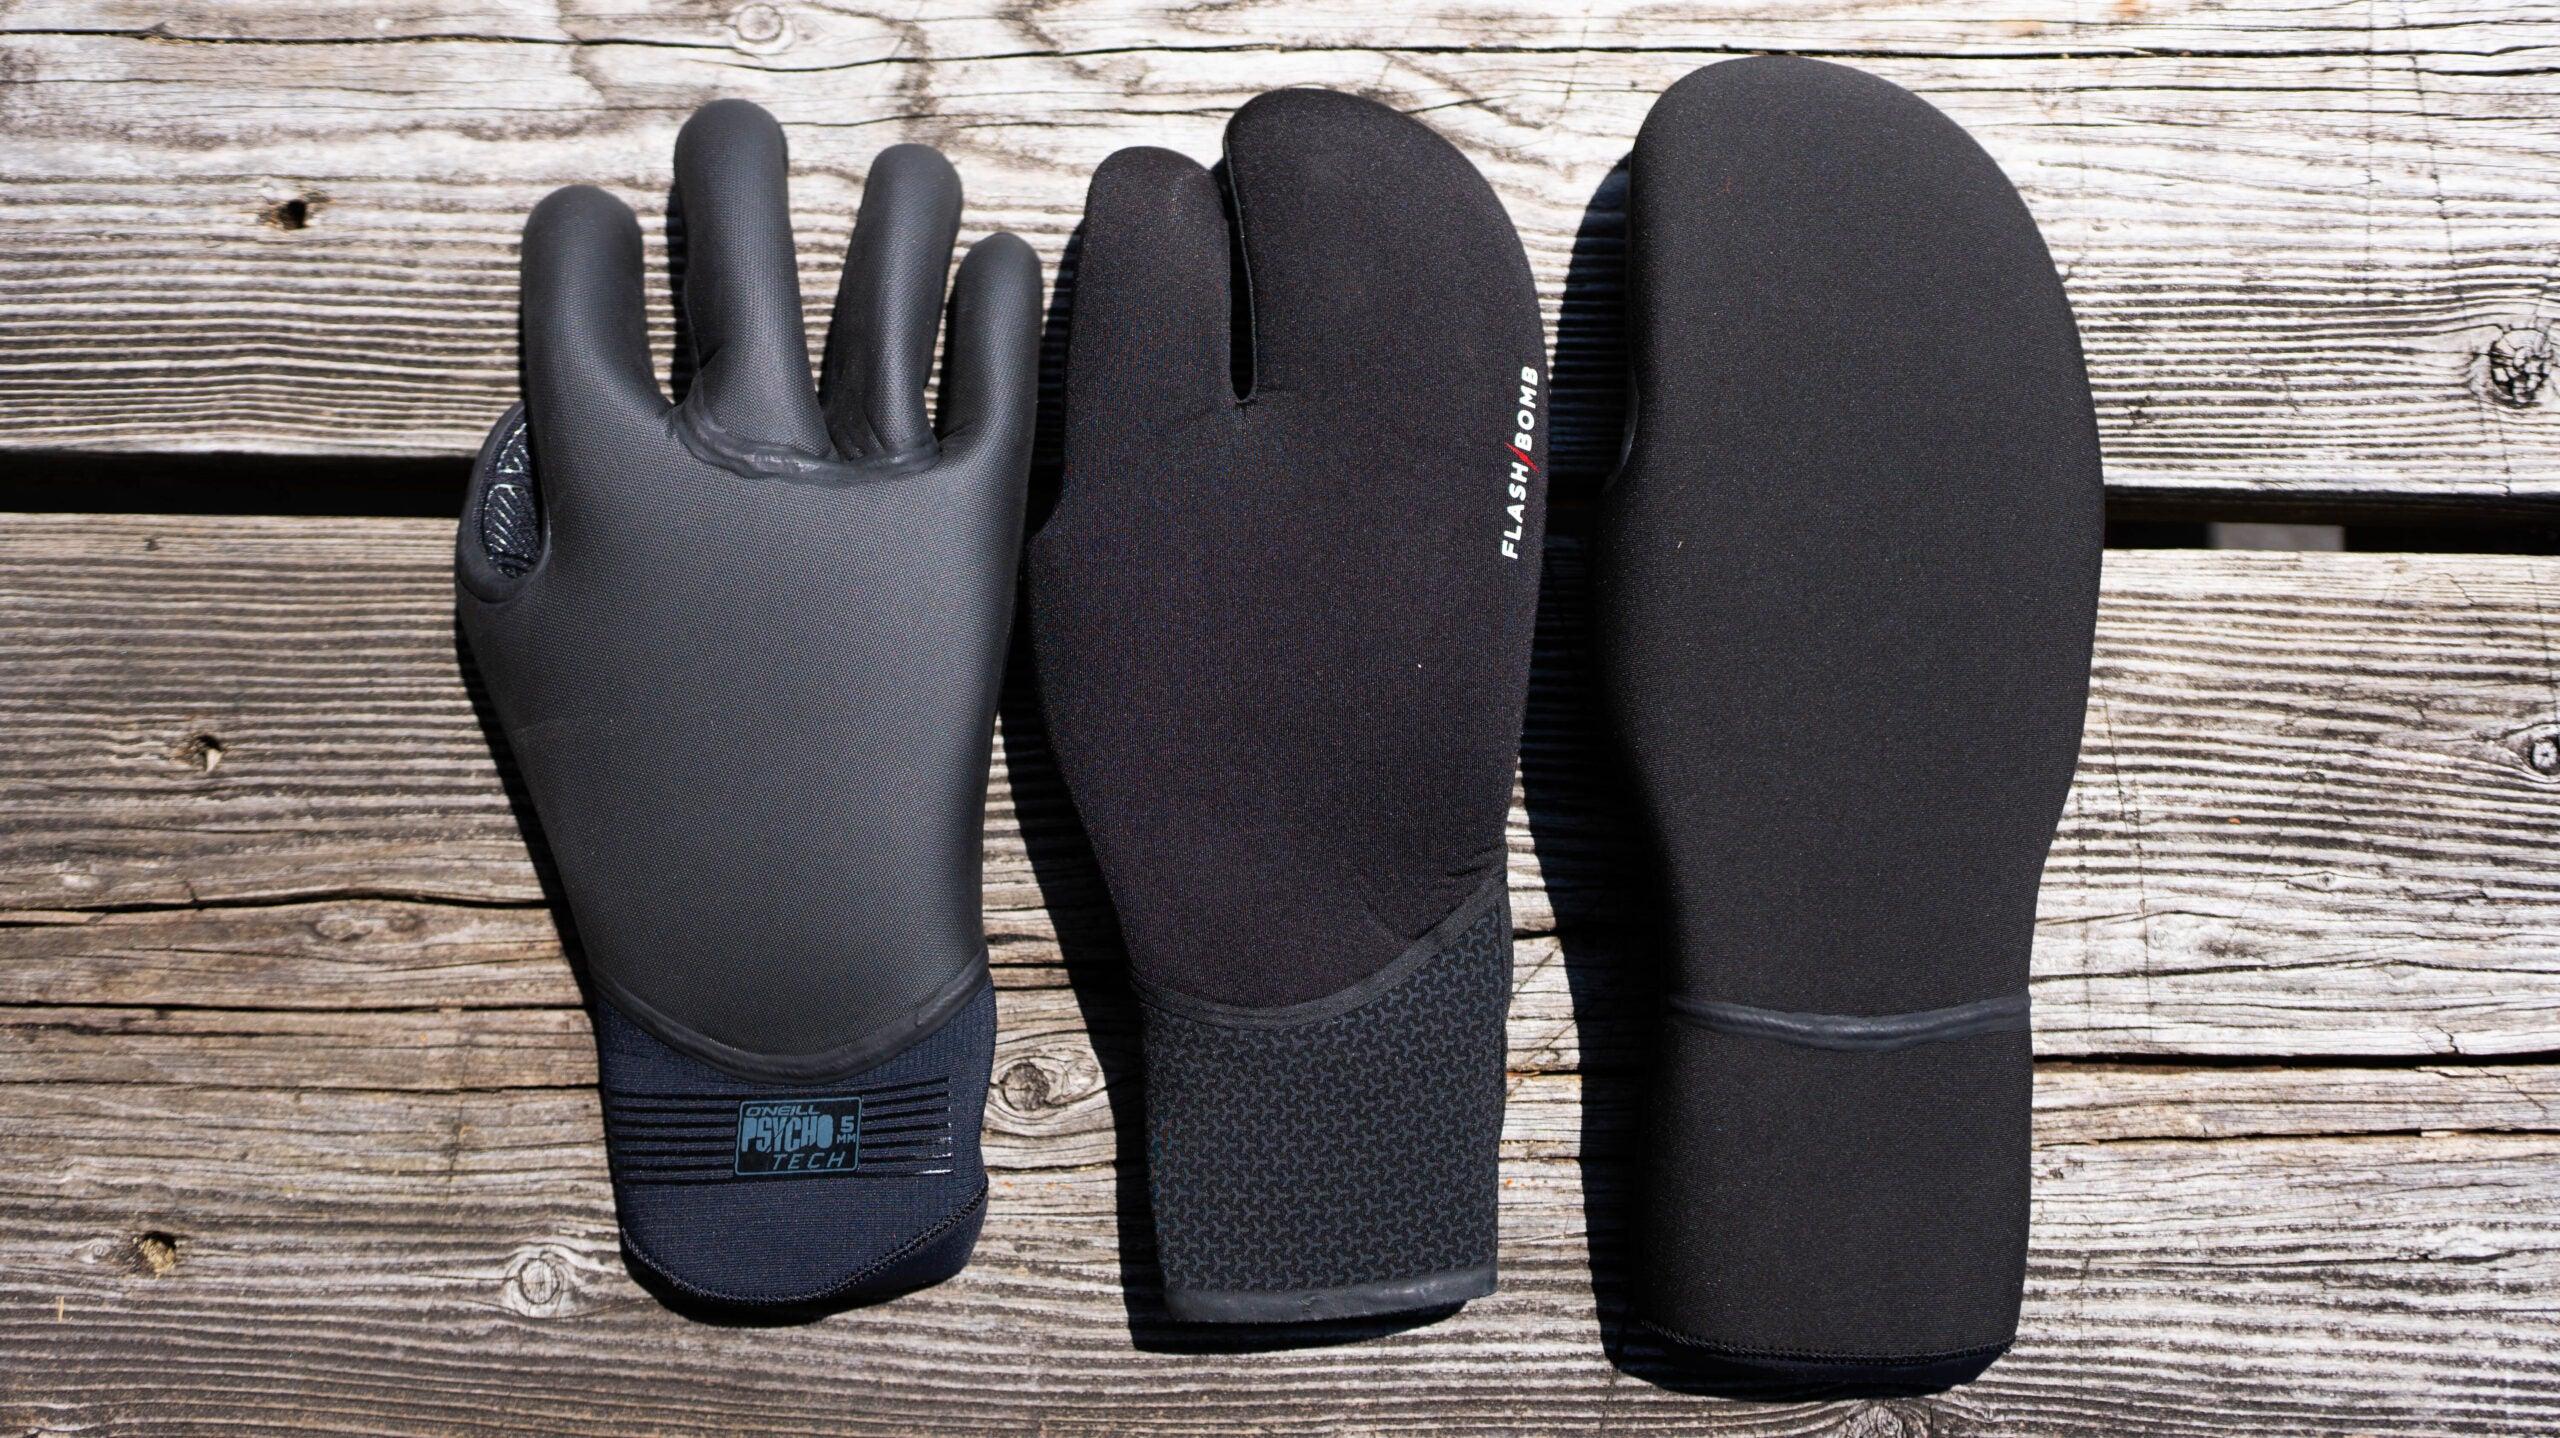 Three gloves lined up to show the different styles available.